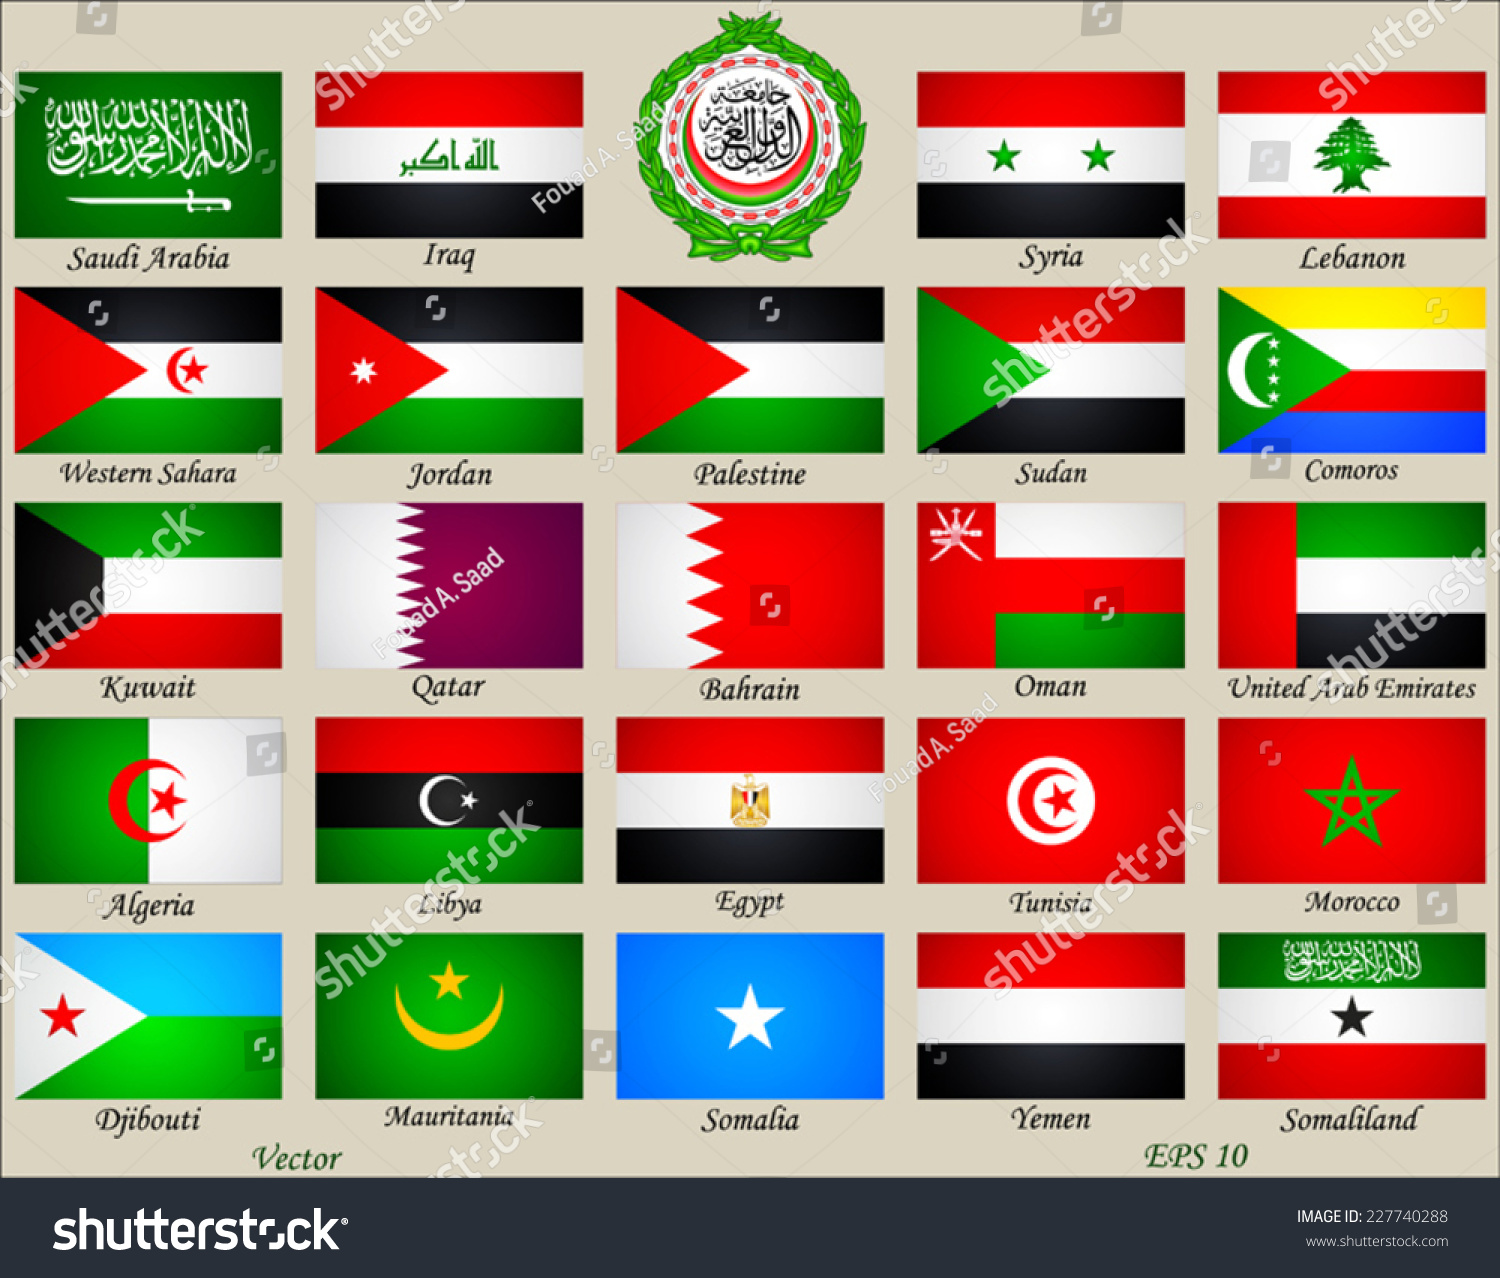 Flags Of The Arab World